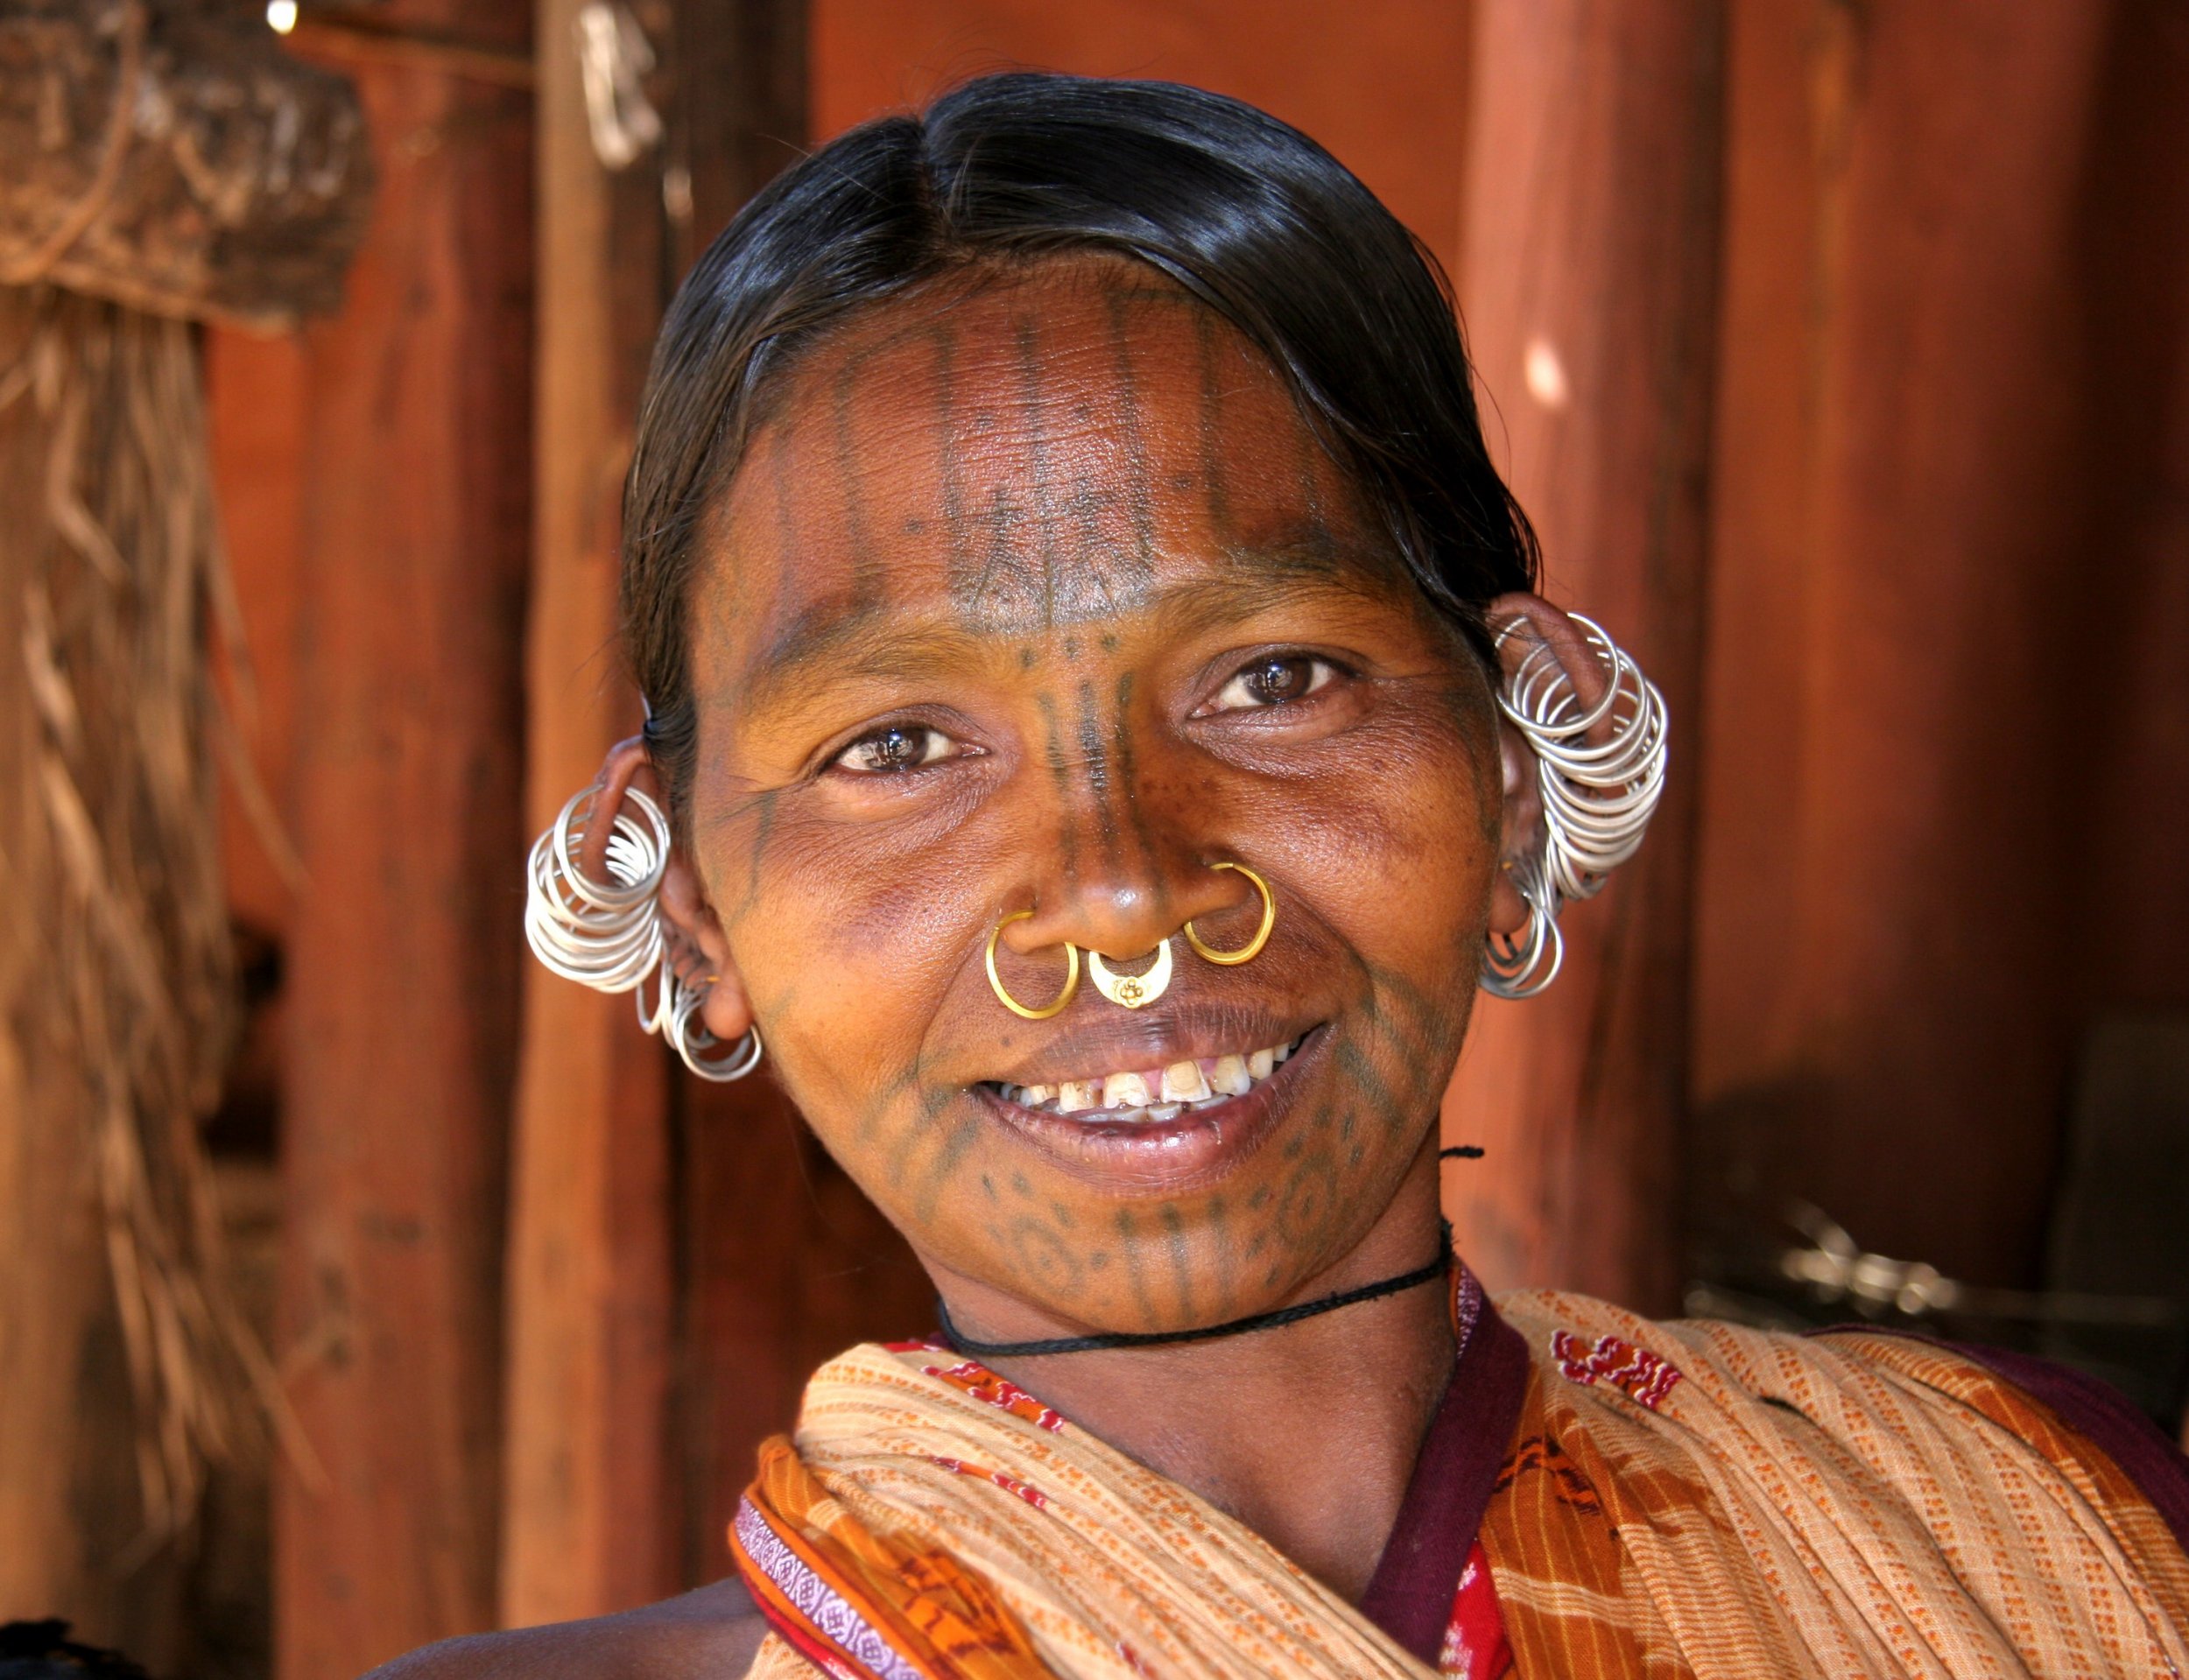 The Tribals Of India: Aboriginal Peoples Without Land